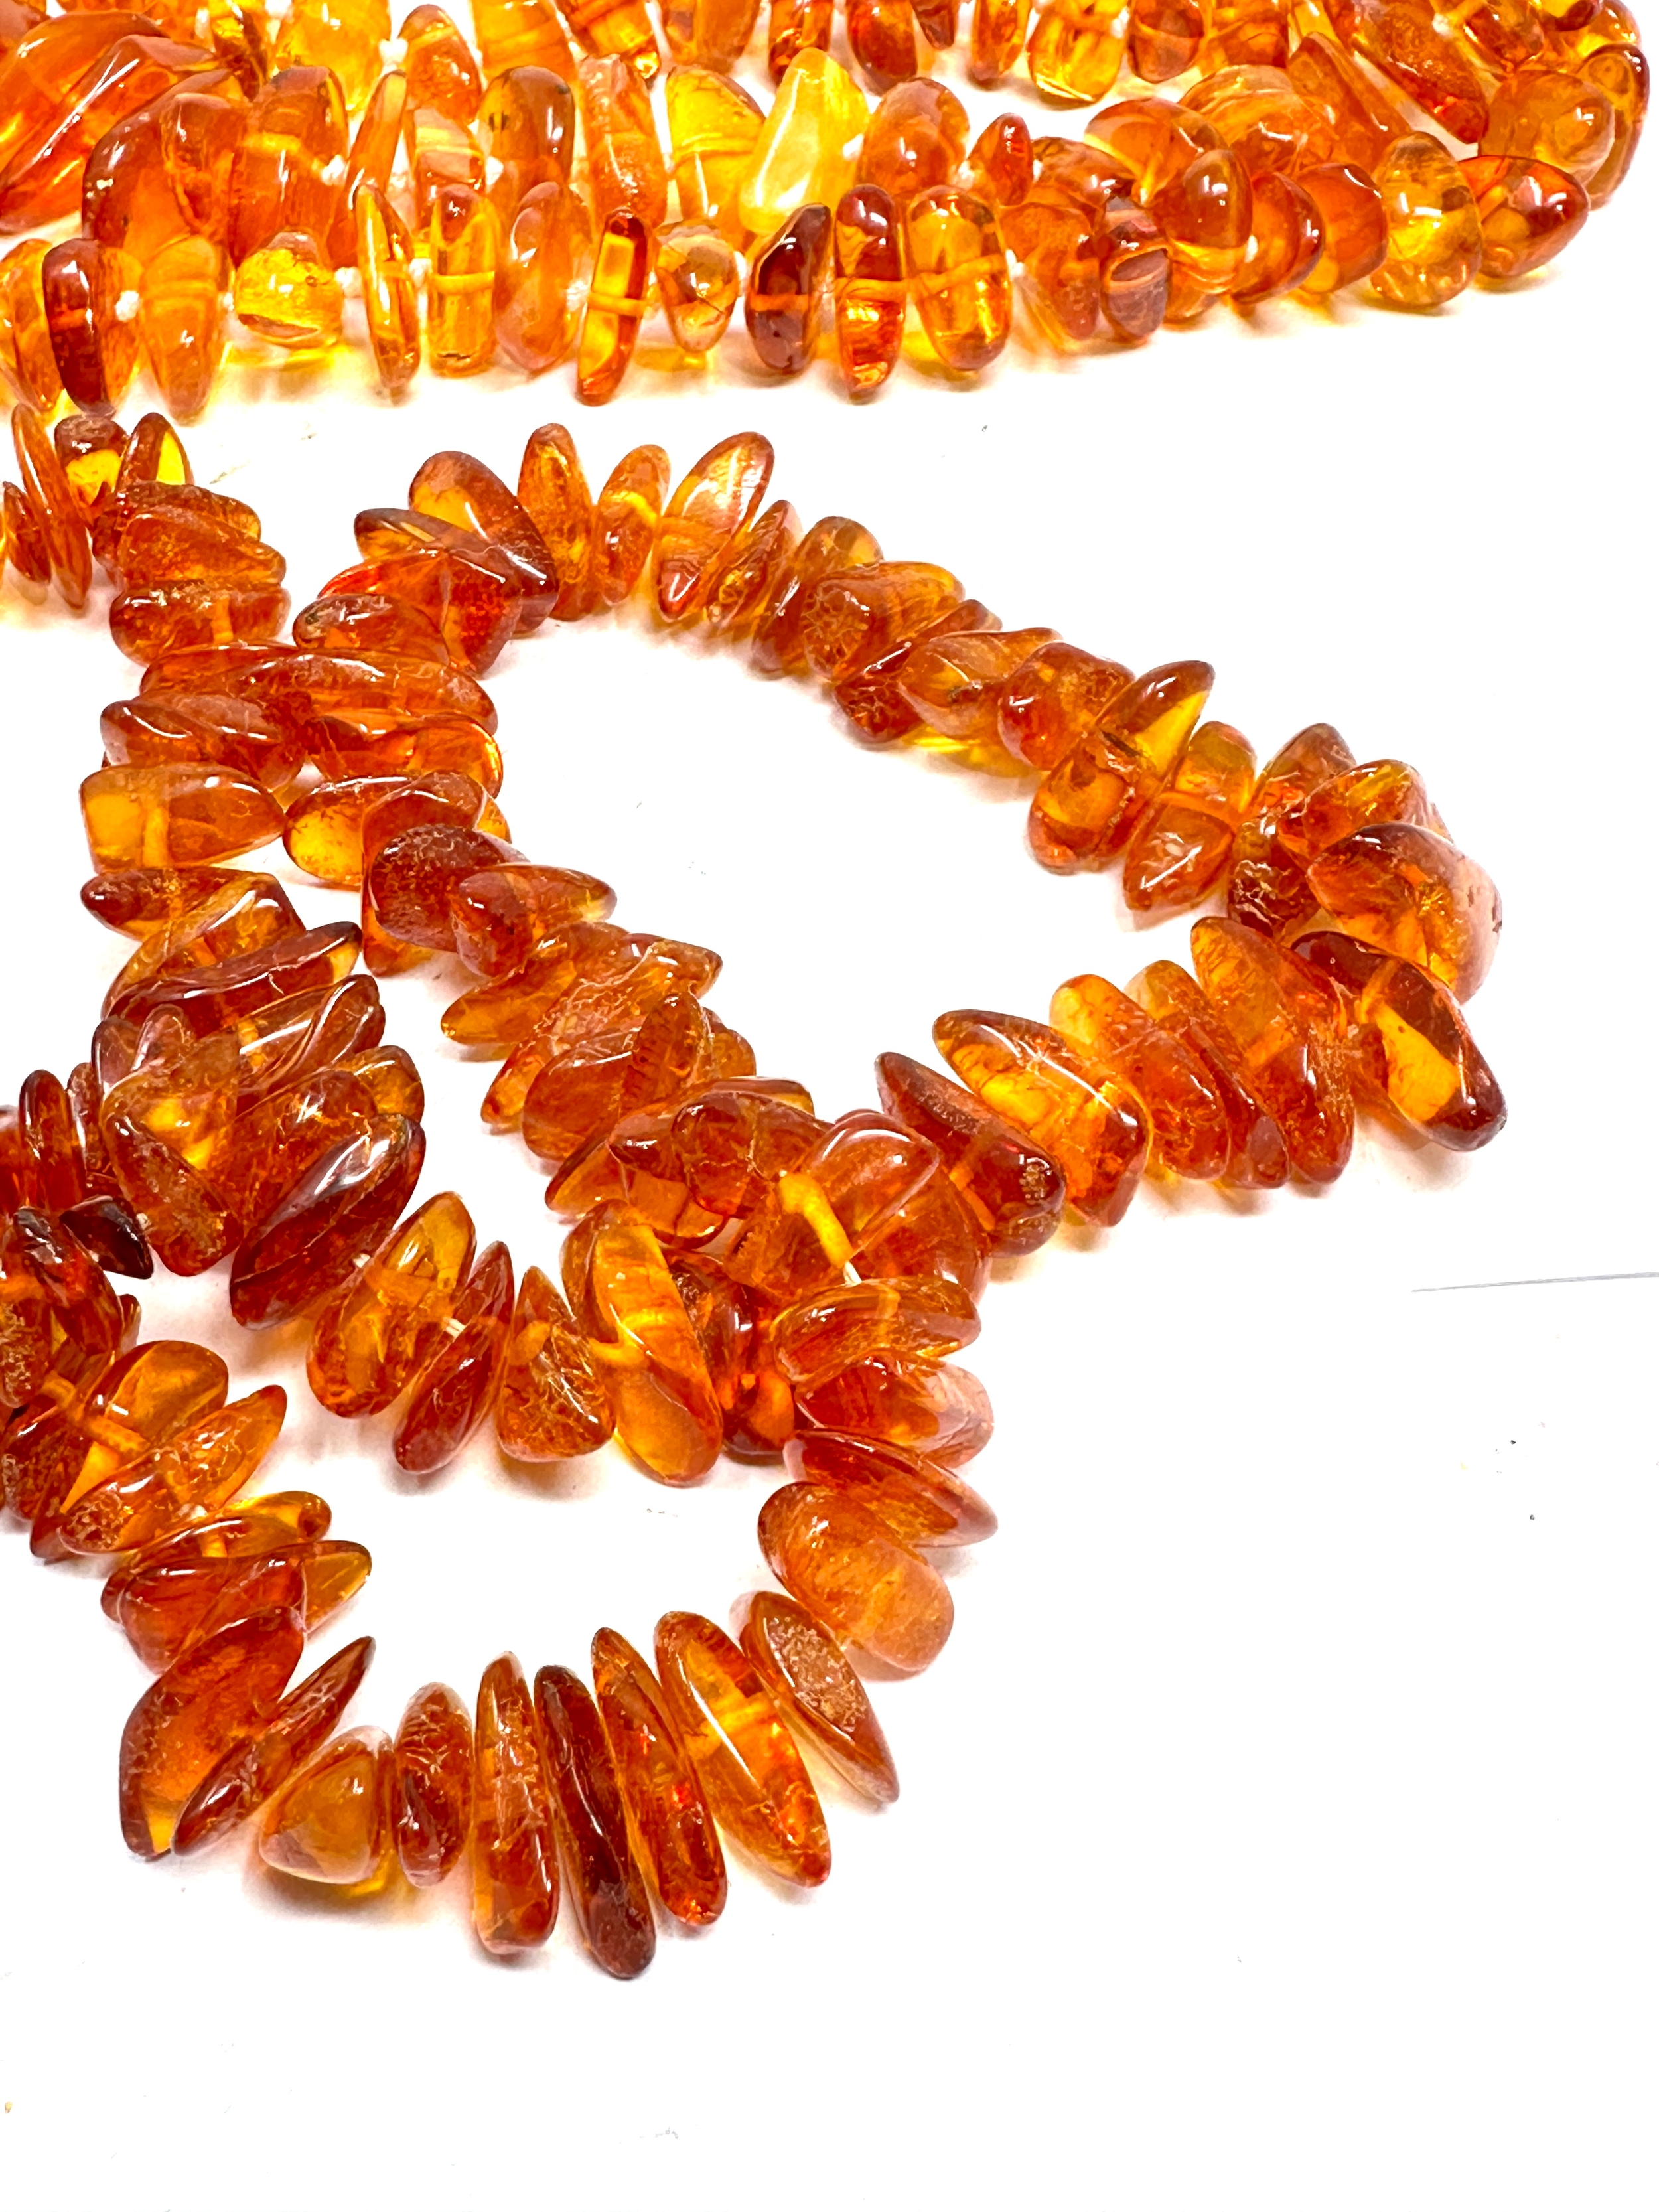 Amber jewellery necklaces weight 113g - Image 2 of 3